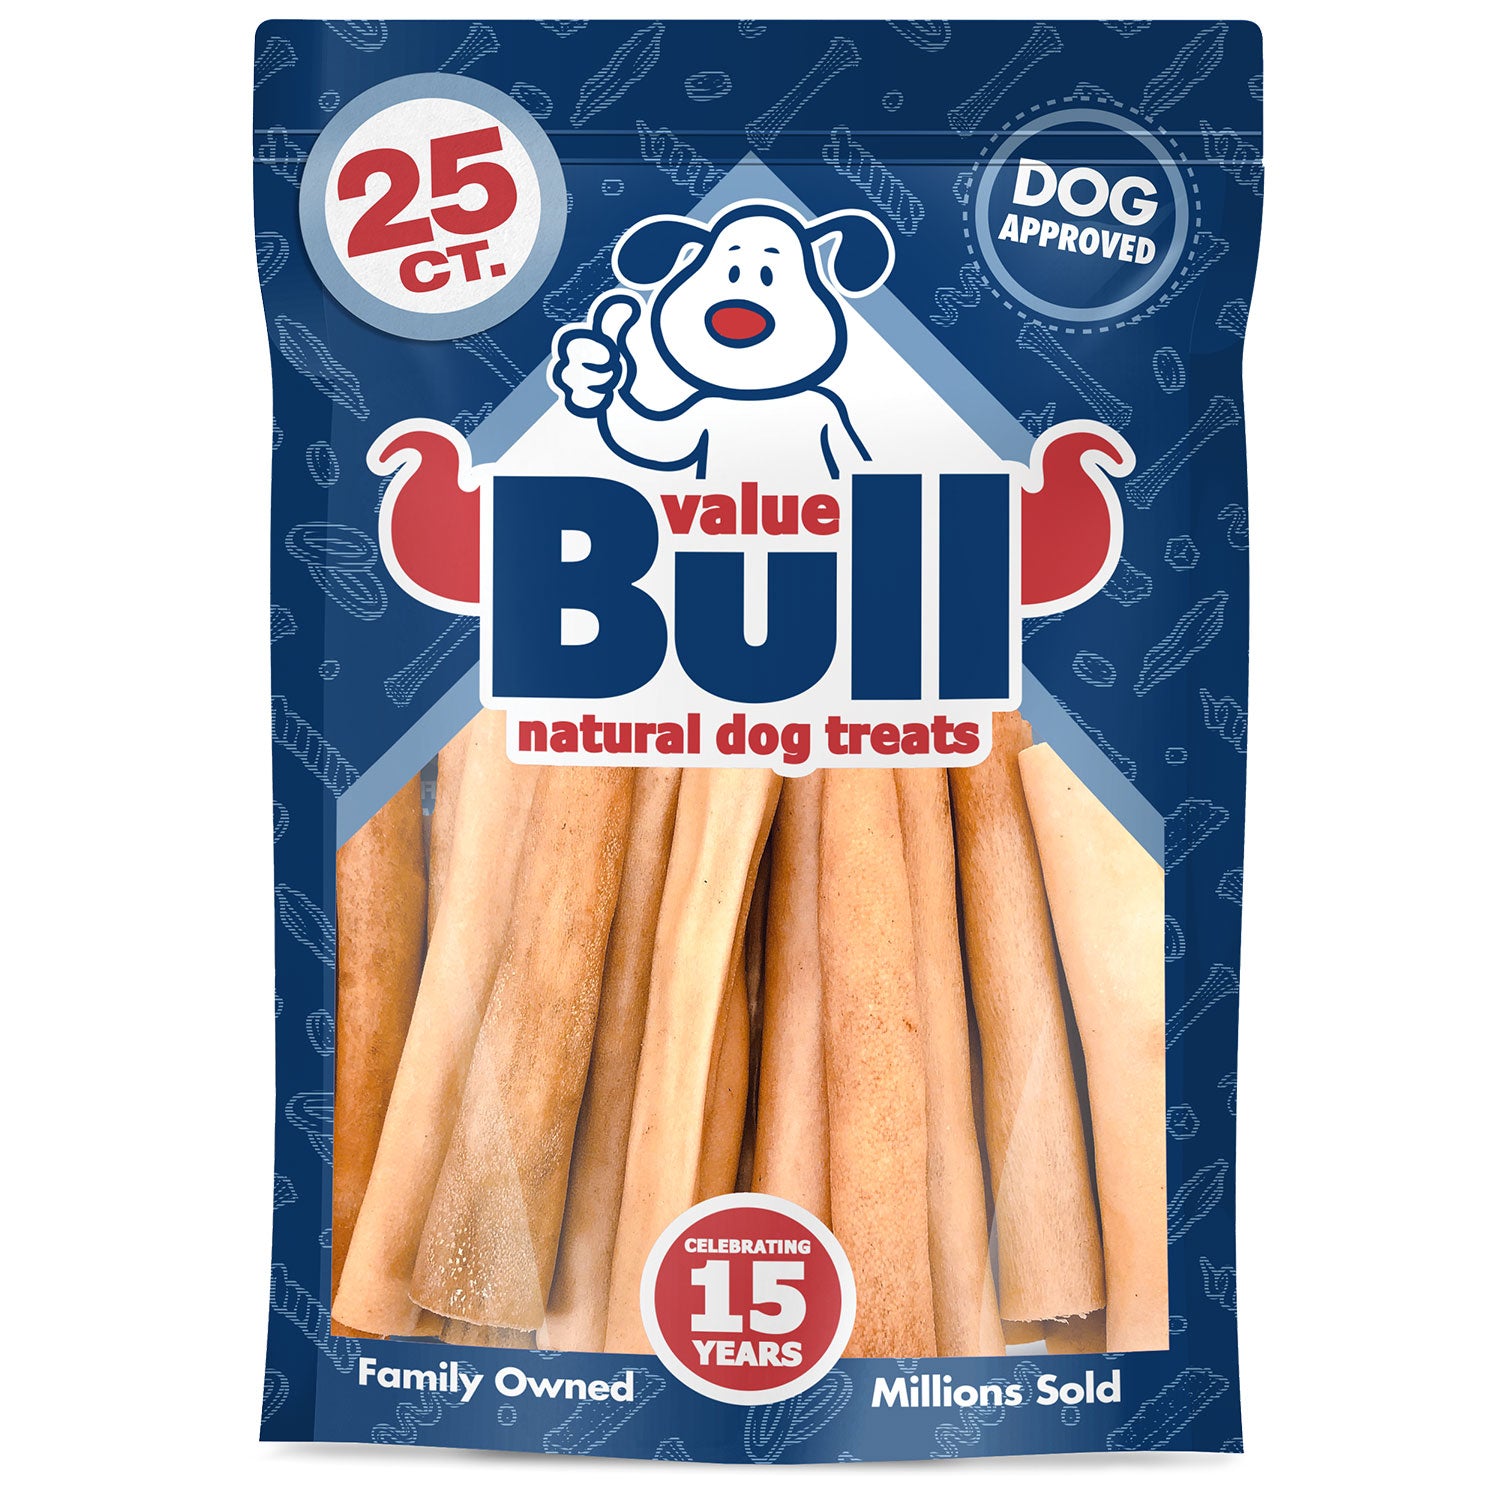 ValueBull Premium Cow Tails, Natural Dog Treats, Regular, 6 Inch, 200 Count